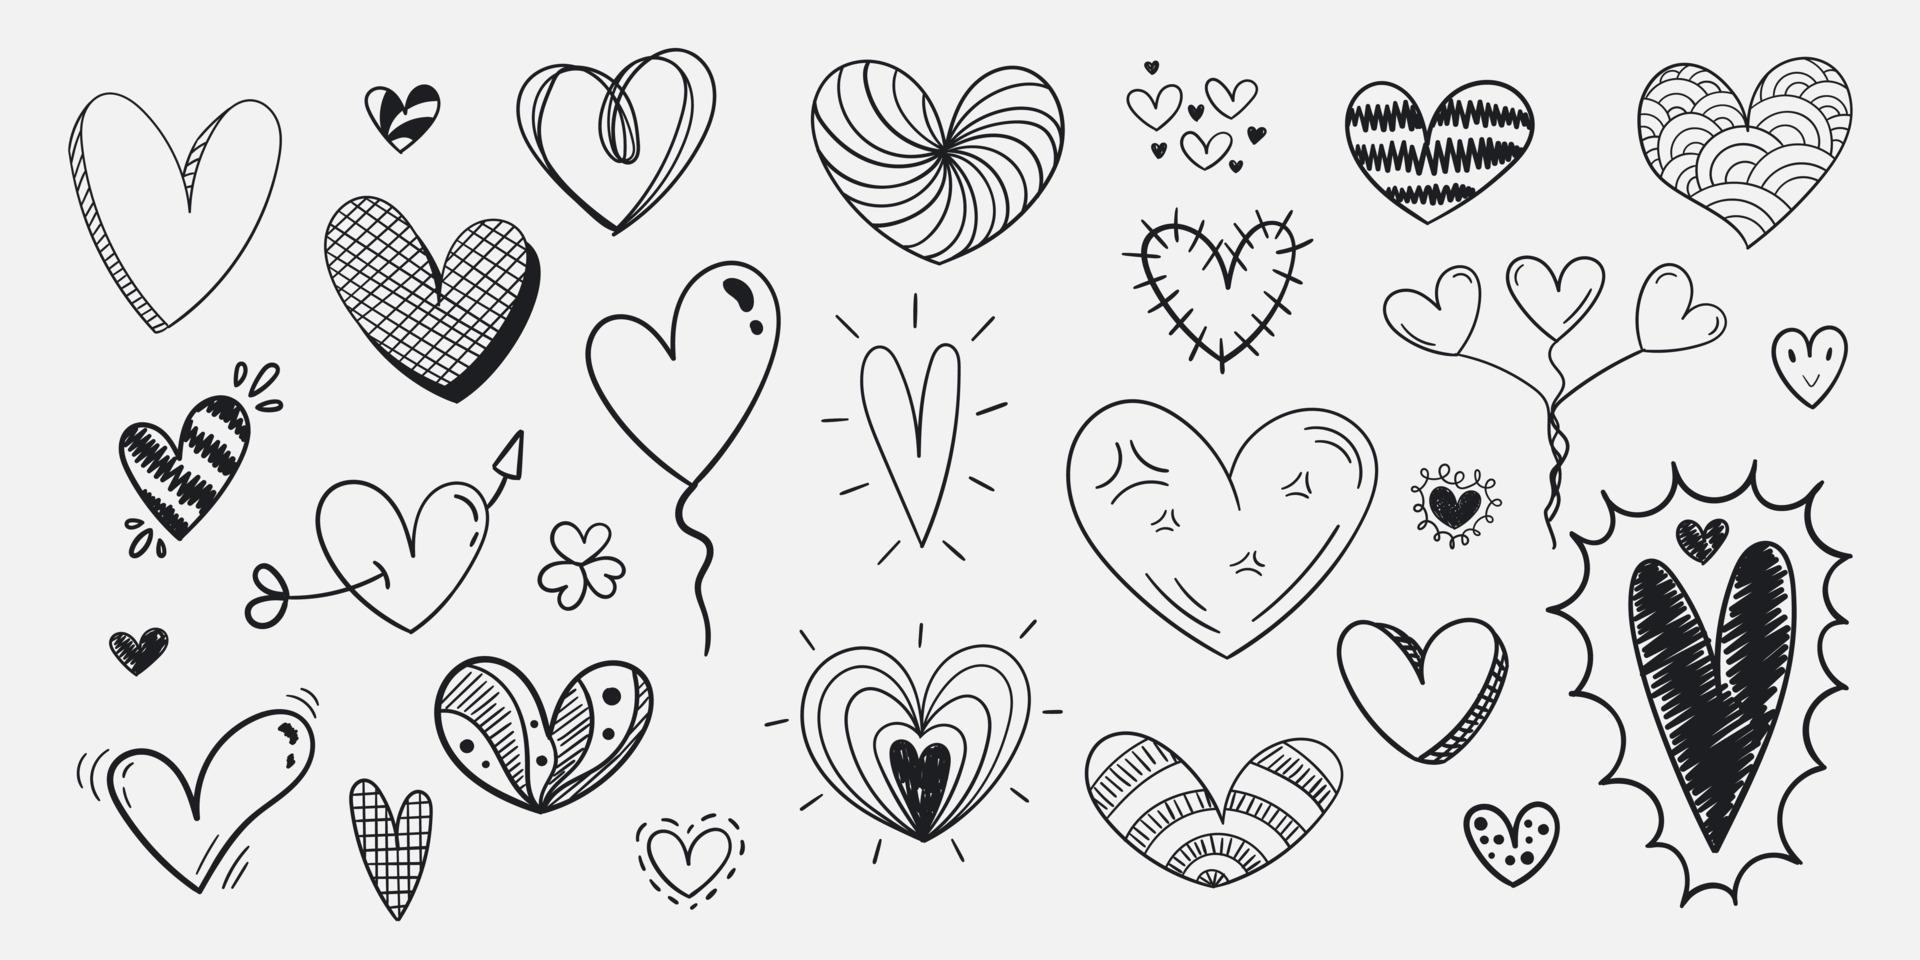 Handwritten hearts set, different styles and sizes. vector